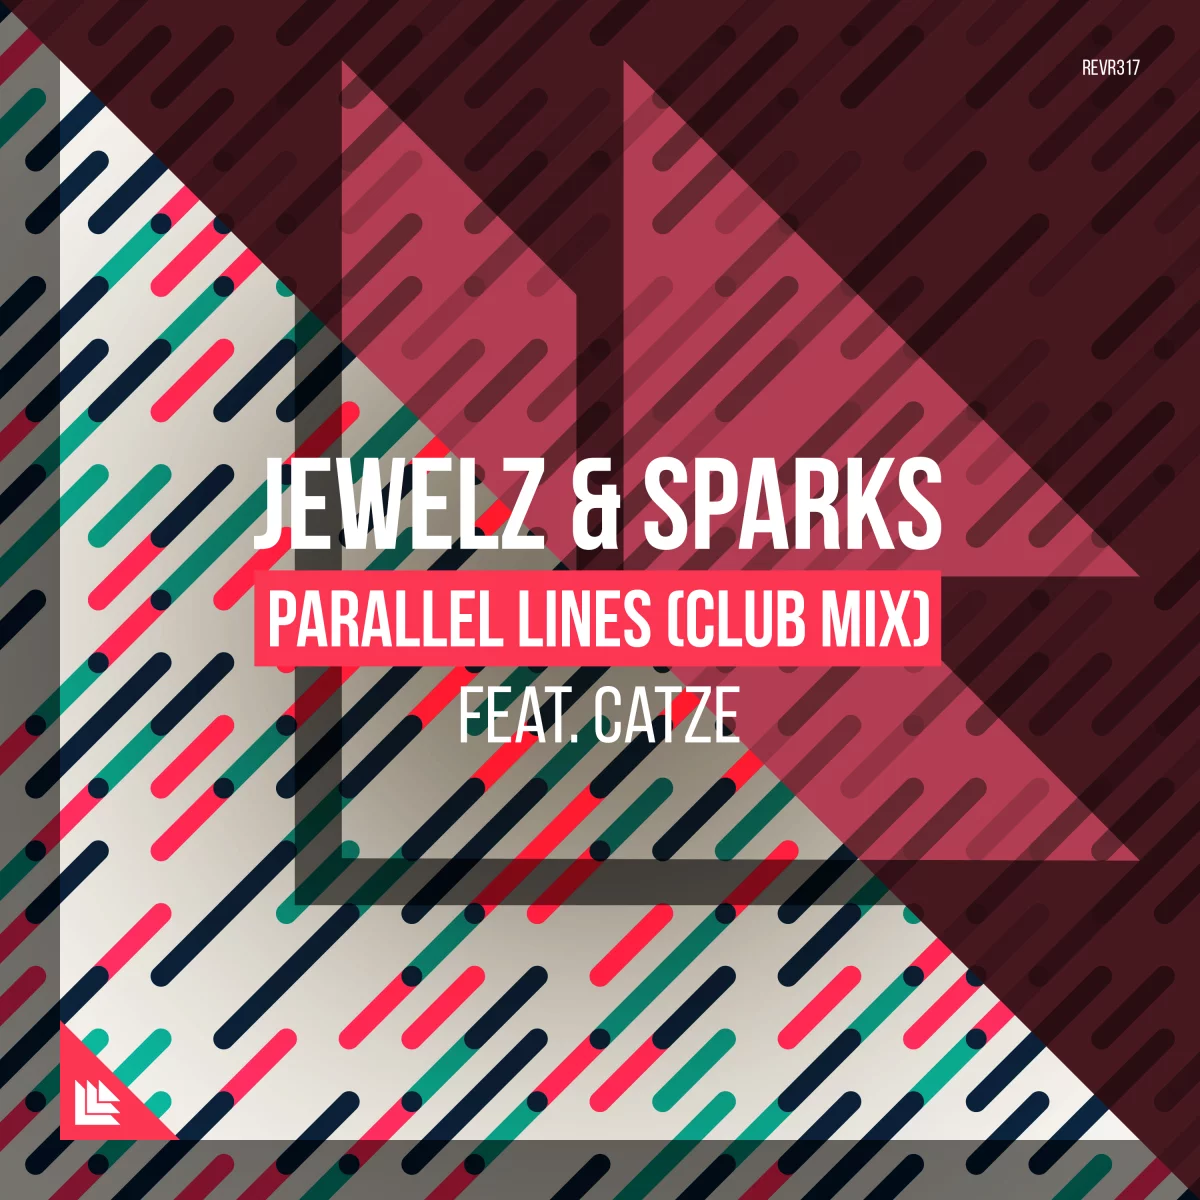 Parallel Lines (Club Mix) - Jewelz & Sparks⁠ feat. CATZE